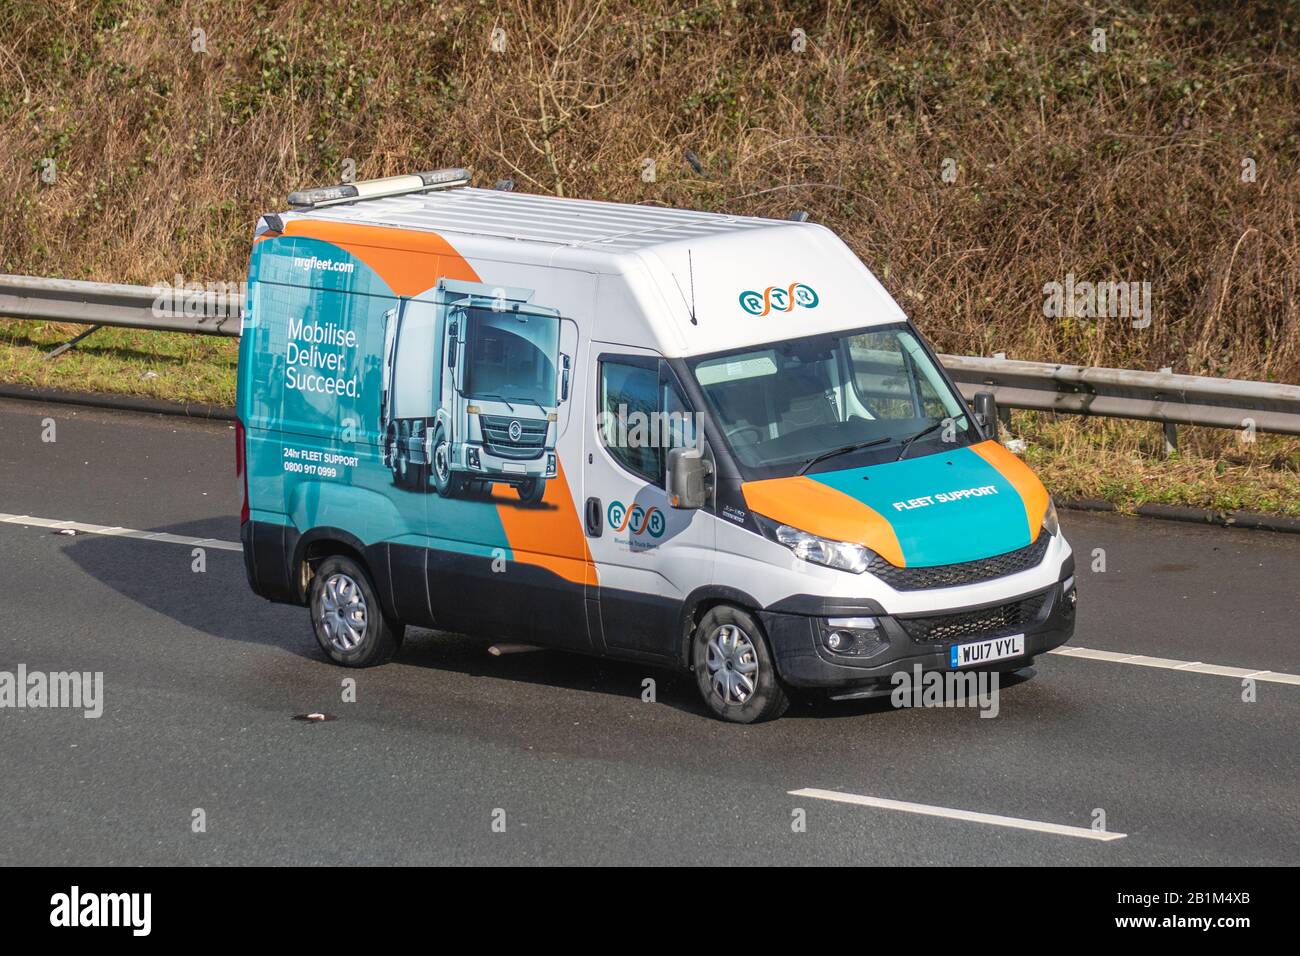 2017 Iveco Daily 35S13 MWB; RTR Fleet Support; UK Vehicular traffic,  transport, modern vehicles, saloon cars, vehicles, vehicle, uk roads,  motors, motoring on the M6 motorway highway Stock Photo - Alamy